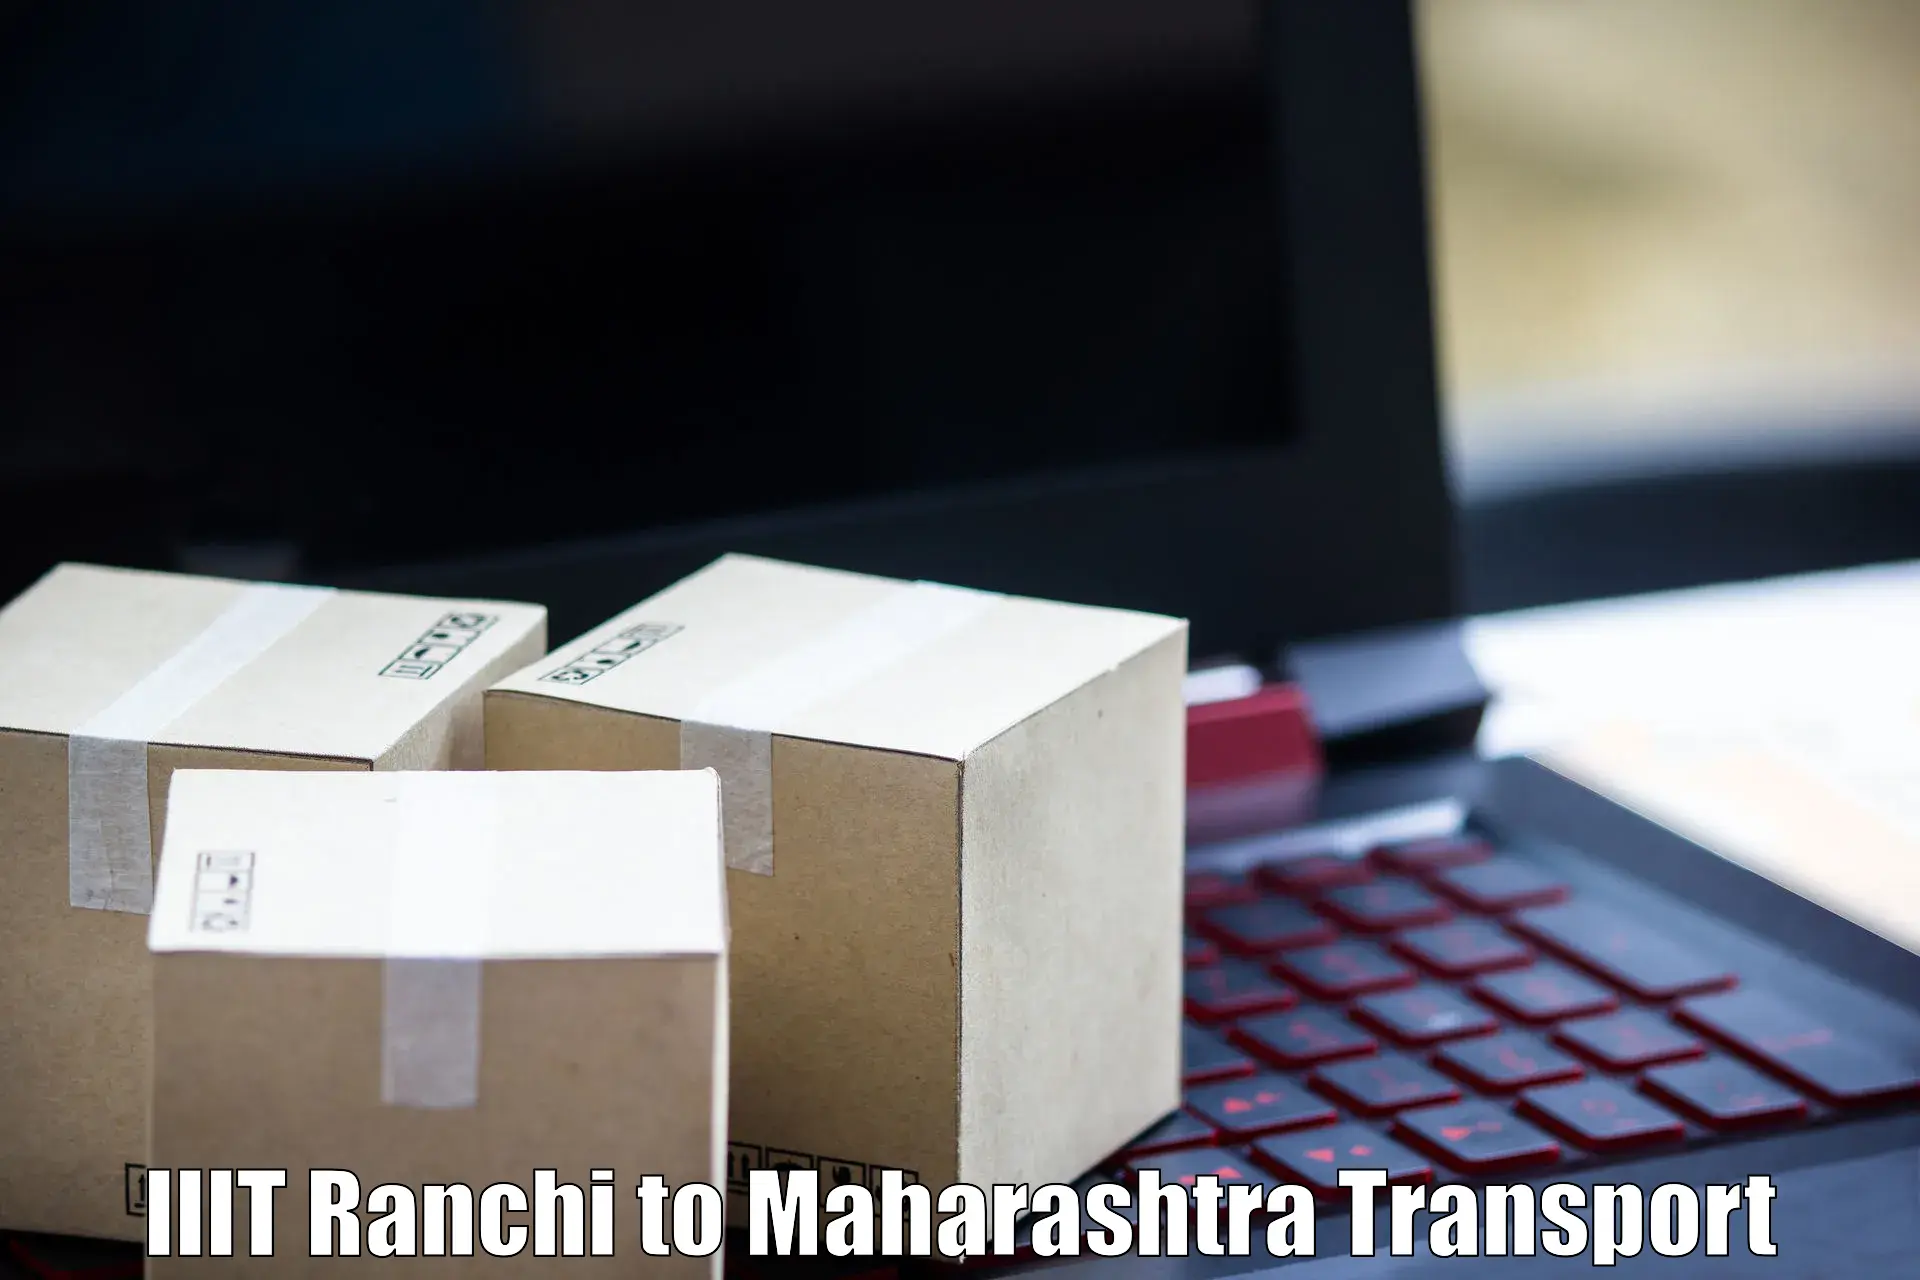 Furniture transport service IIIT Ranchi to Loha Nanded